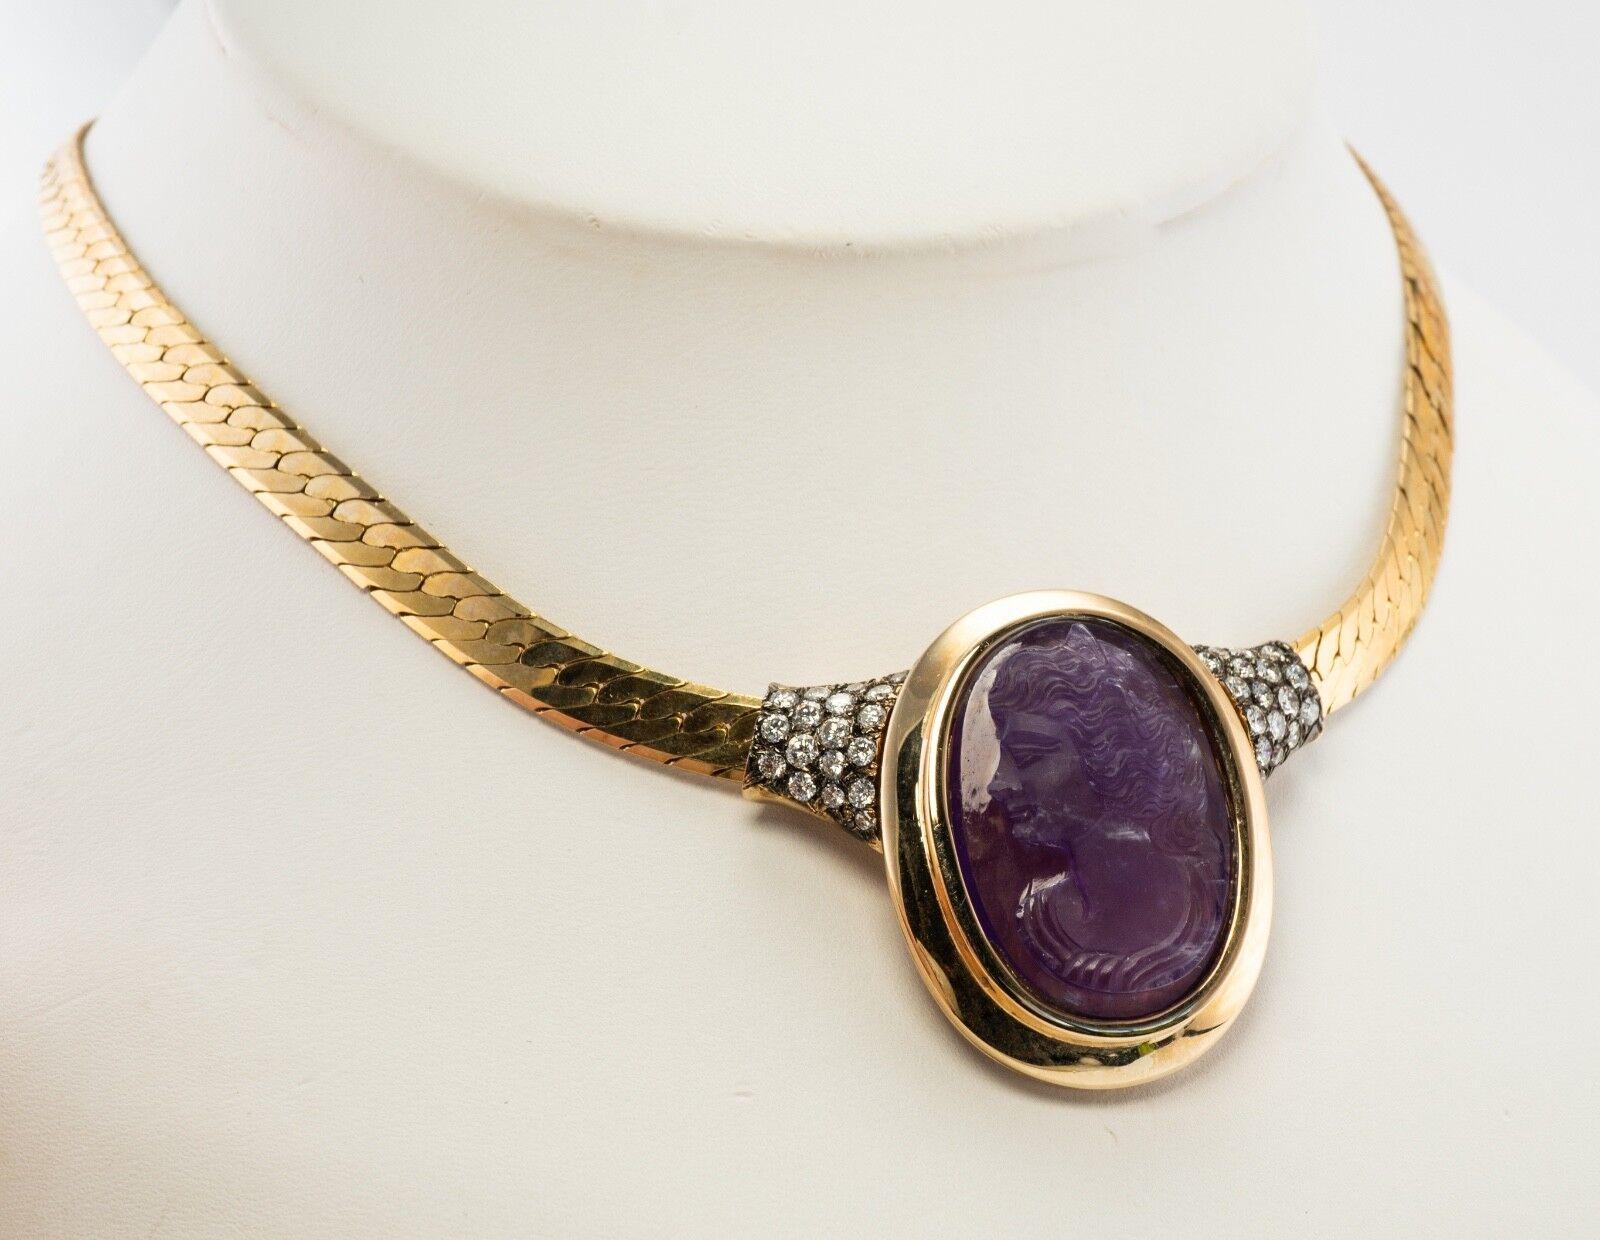 Amethyst Necklace Diamond Cameo Choker 14K Gold

The center Genuine Earth mined Amethyst Cameo measures 1 1/8 in x 6/8 in. The cameo is very well carved, the profile is high. The entire pendant/slide measures 1 5/16 in x 1 in x 7/16 in. PLUS: There